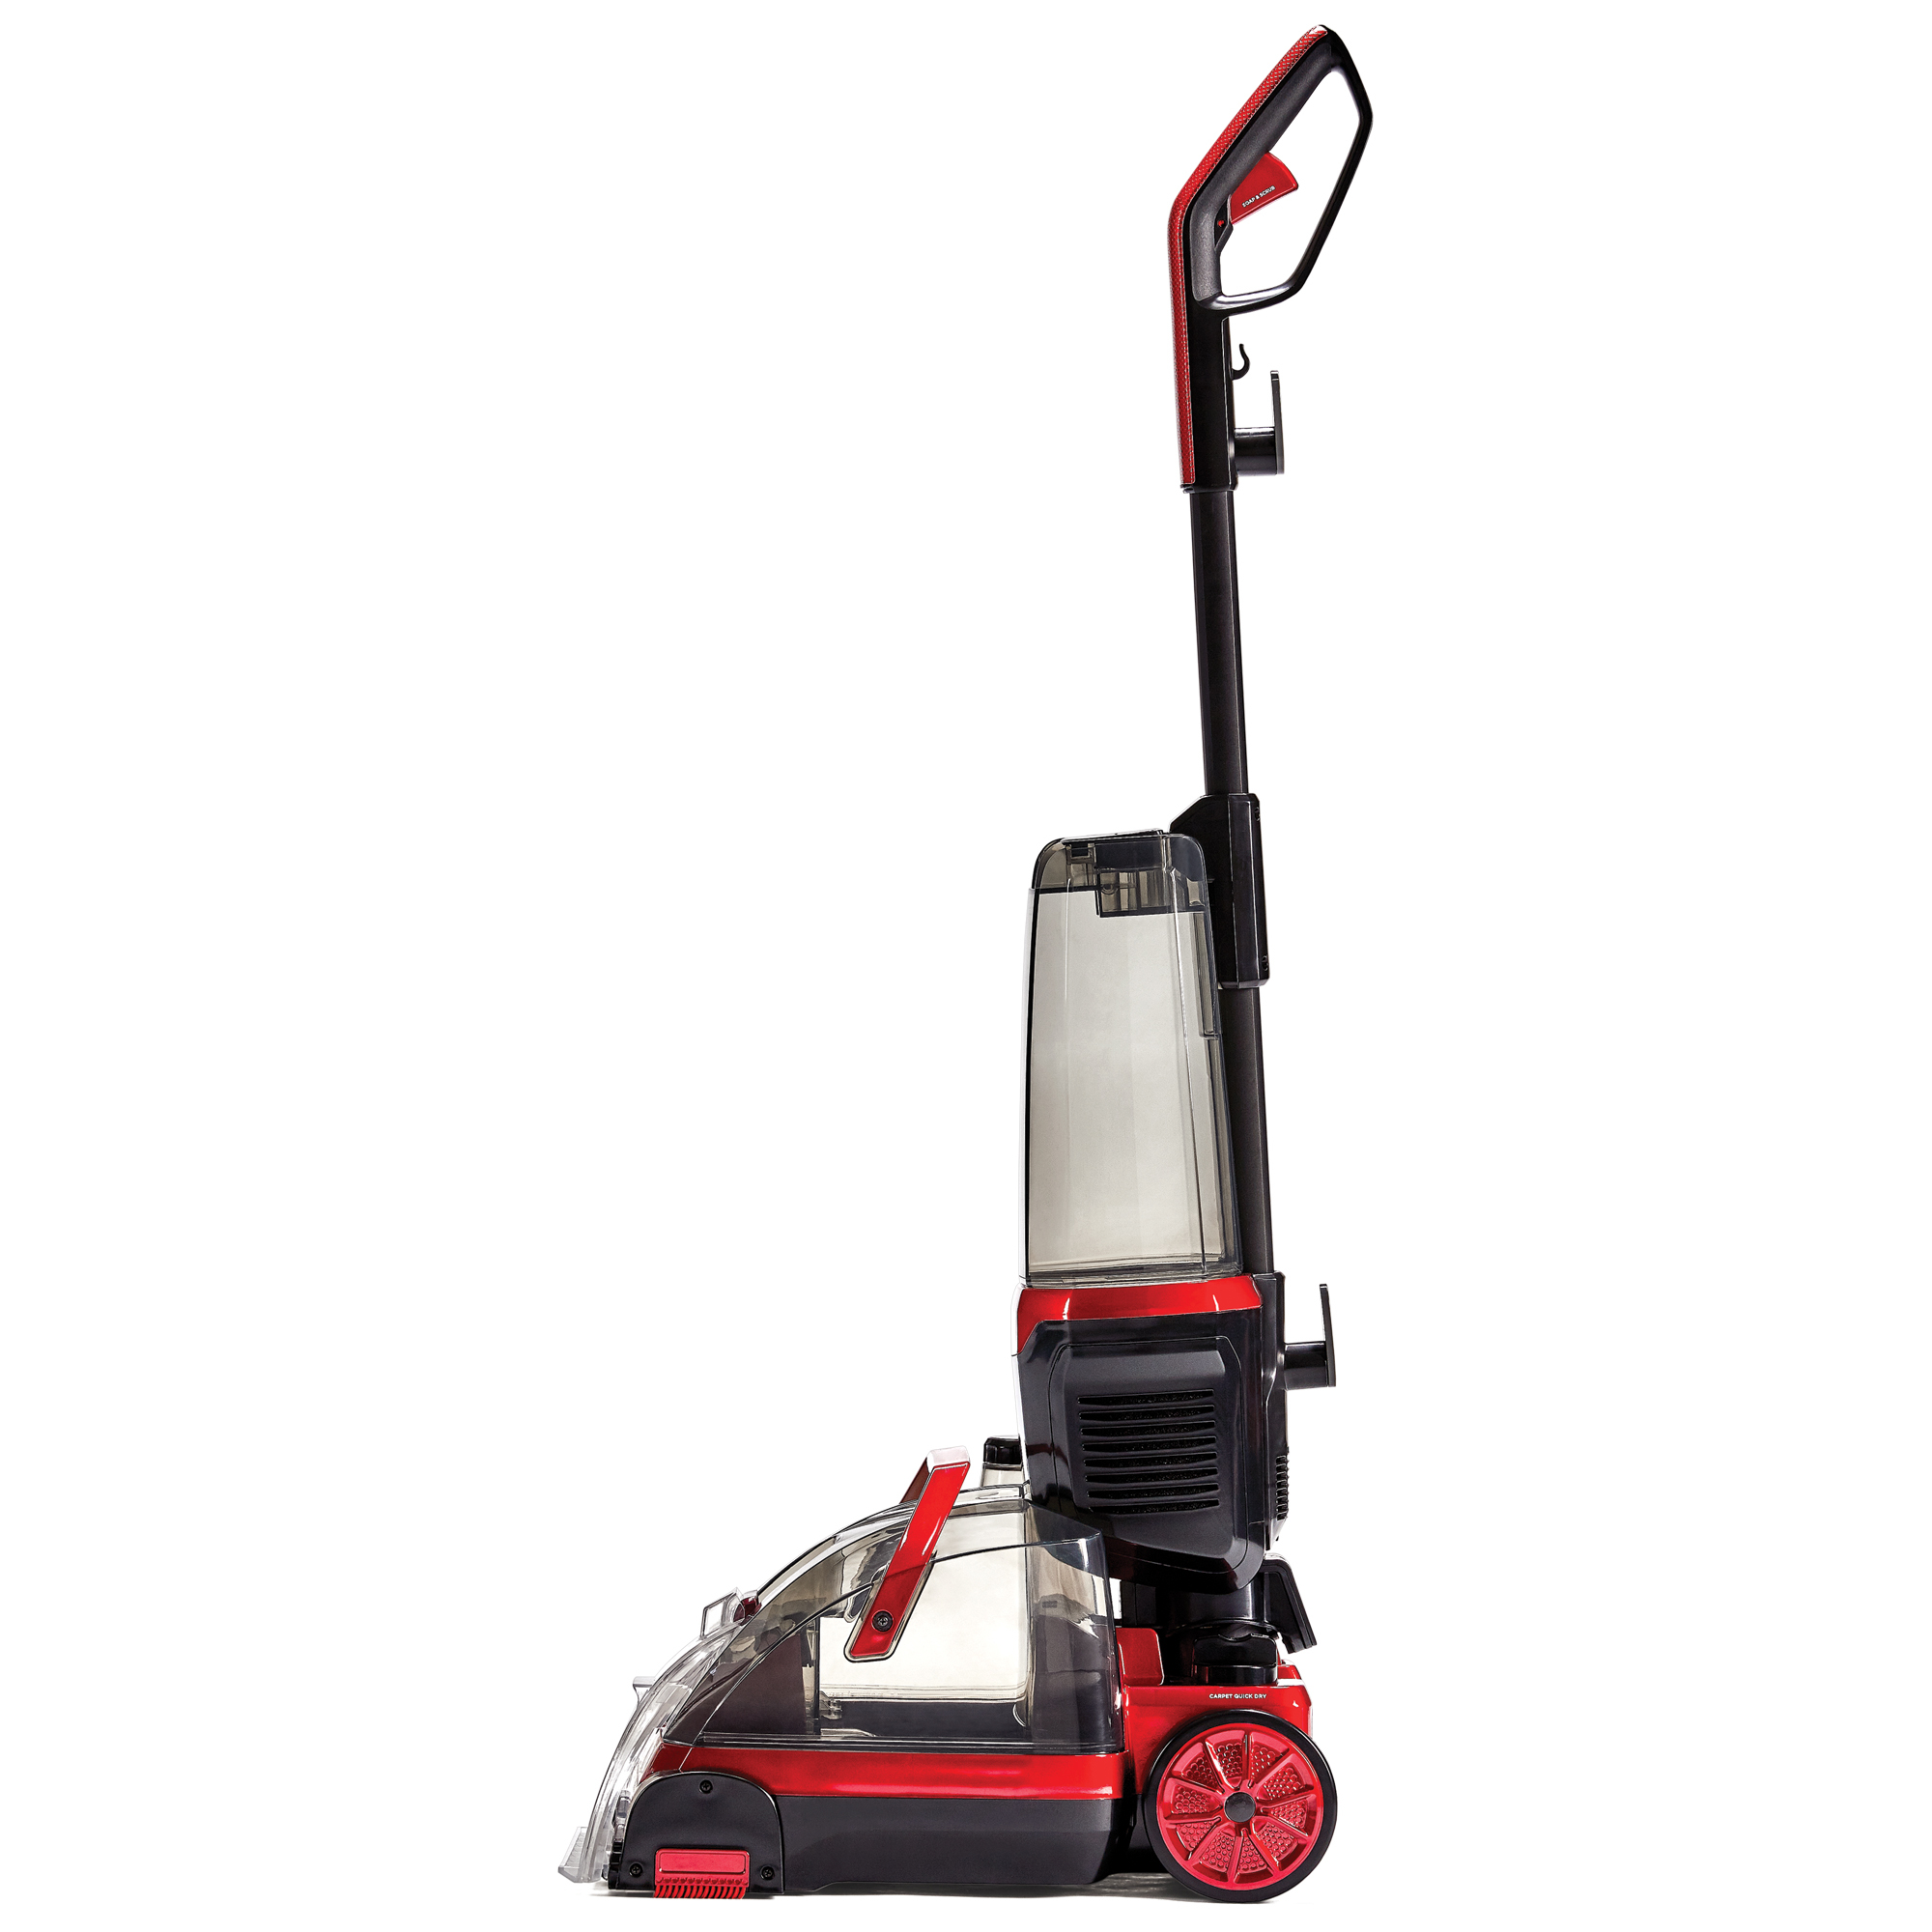 Rug Doctor FlexClean Dual Action Hardfloor and Carpet Cleaner Machine - image 8 of 11